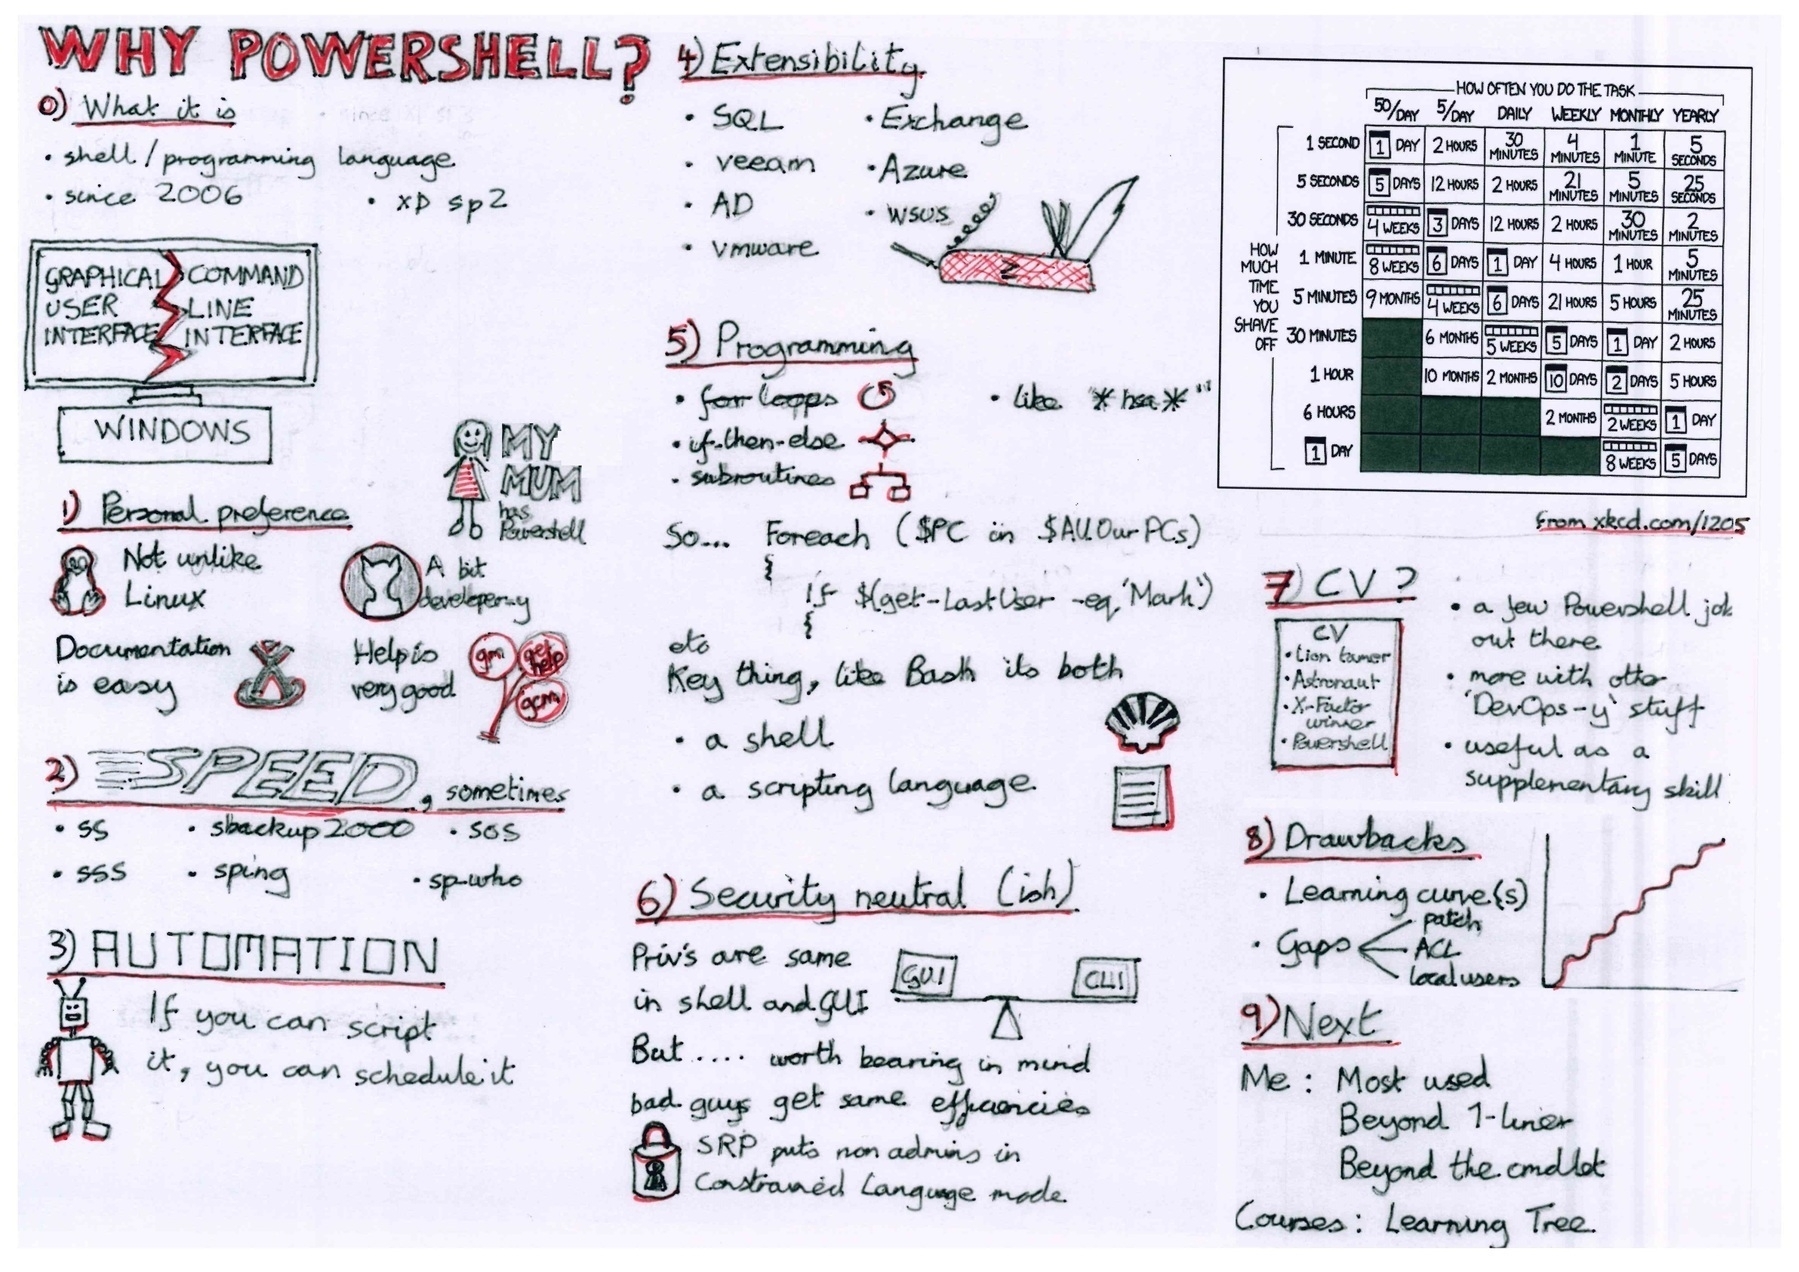 Sketchnote on the many virtues of Powershell